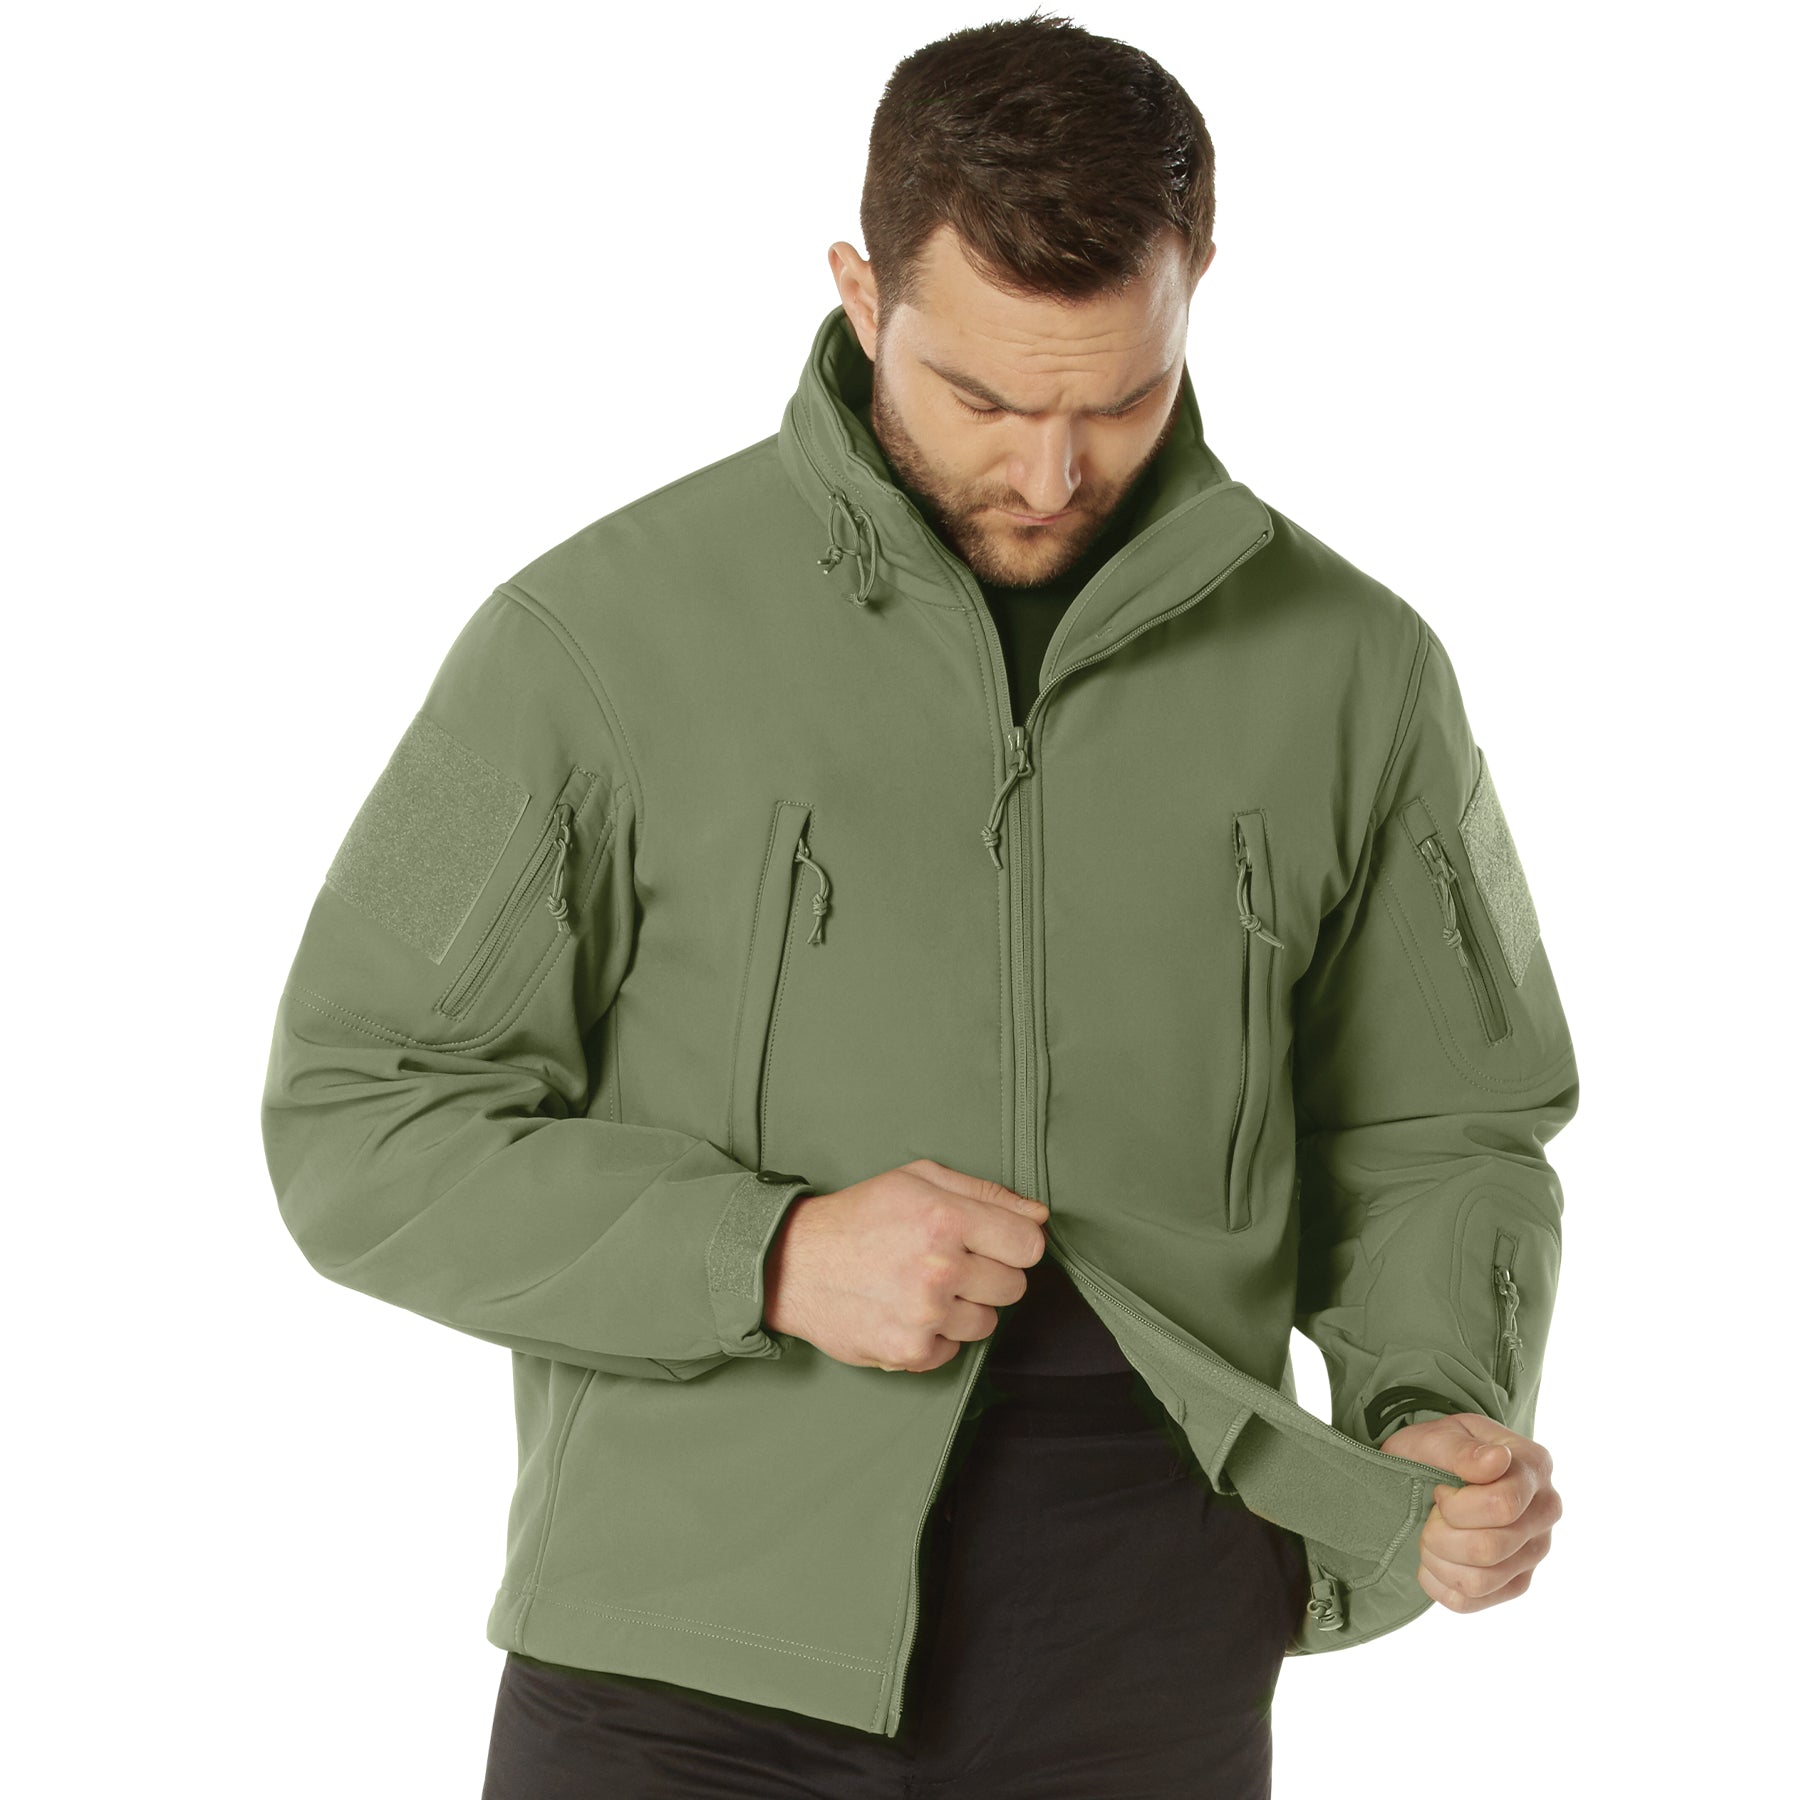 Poly Spec Ops Tactical Soft Shell Jackets